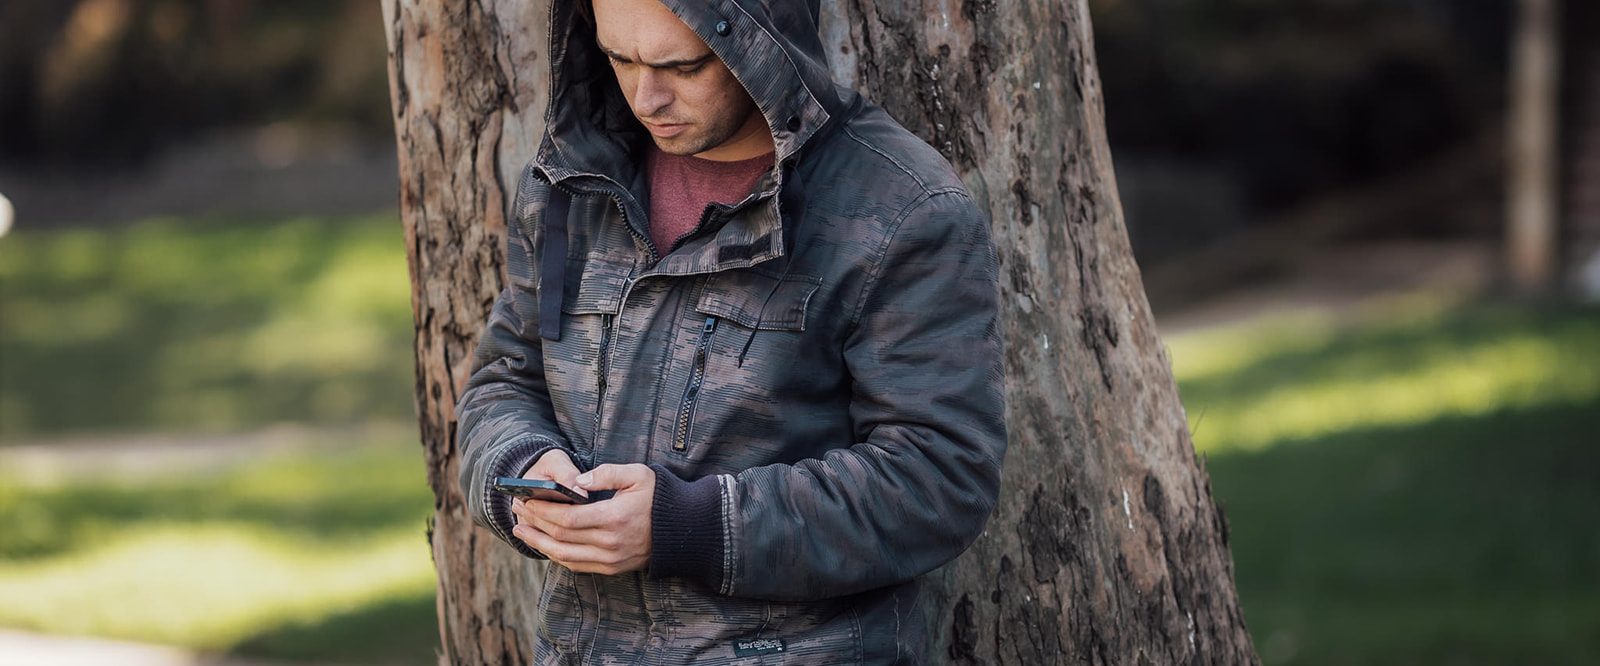 A young man wearing a dark hooded jacket, standing against a tree texting on a phone.